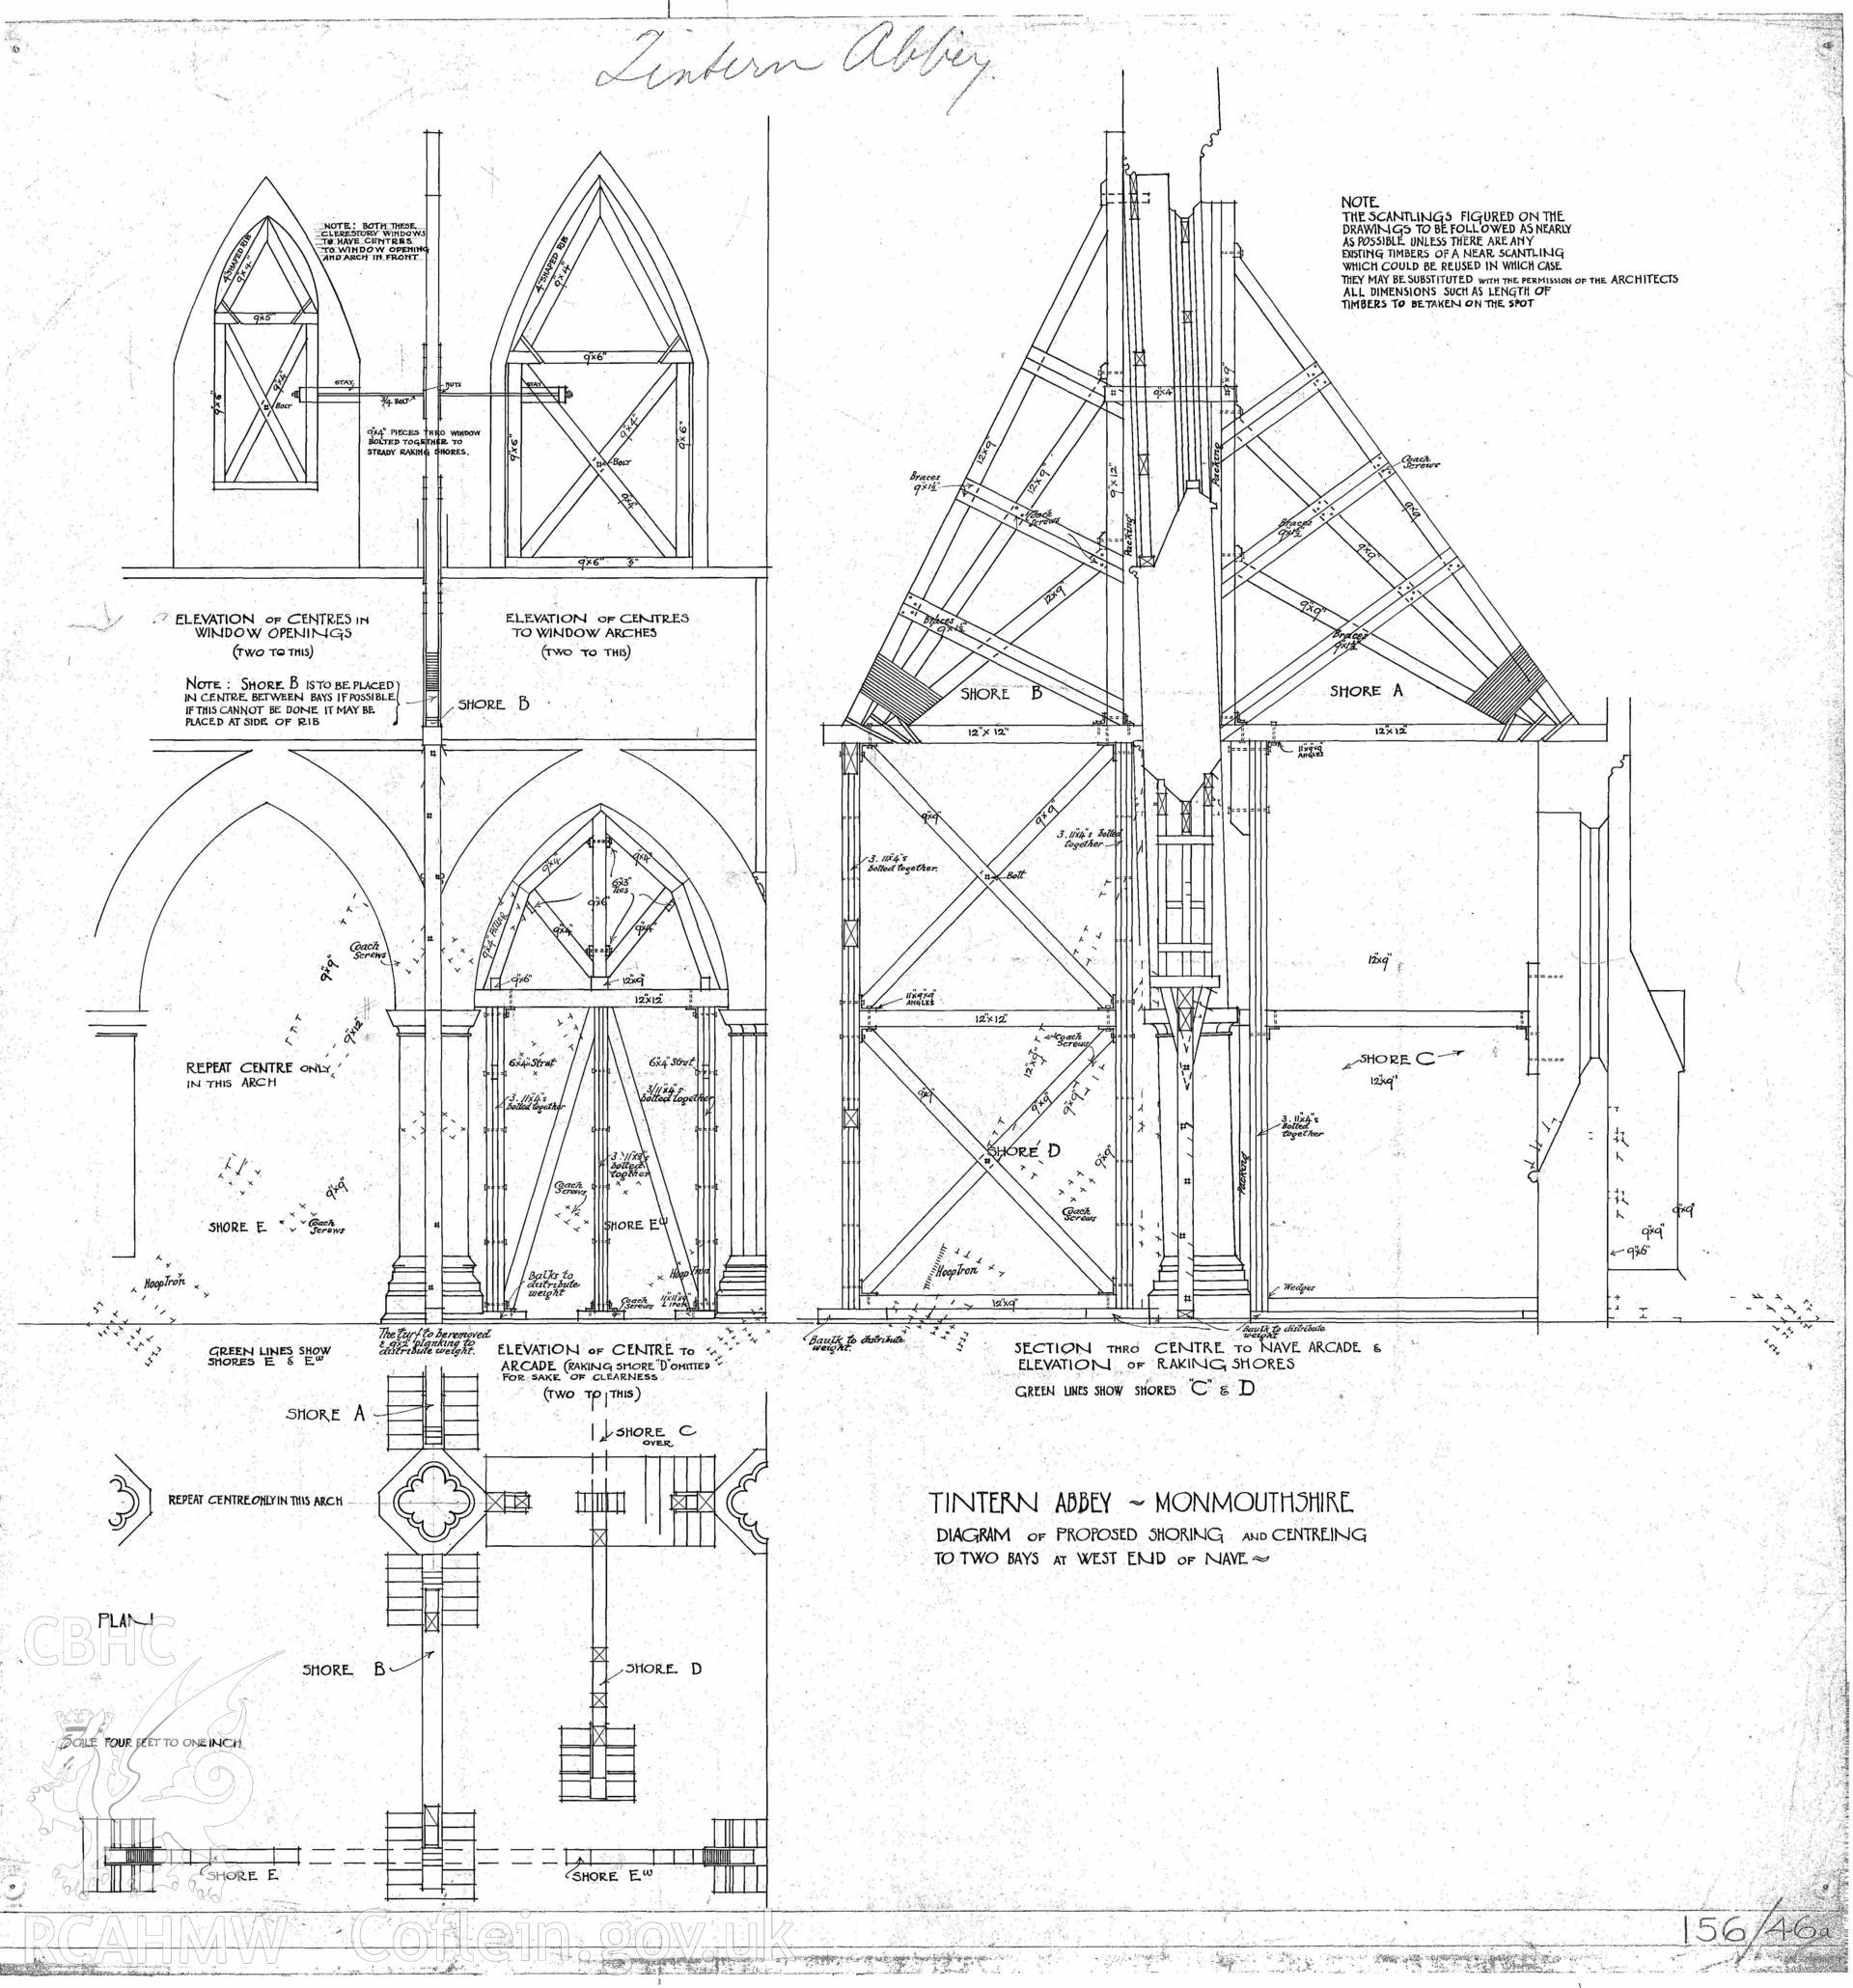 Cadw guardianship monument drawing of Tintern Abbey. Shoring of 2 bays W end of nave. Cadw ref. No. 156/46a. Scale 1:.